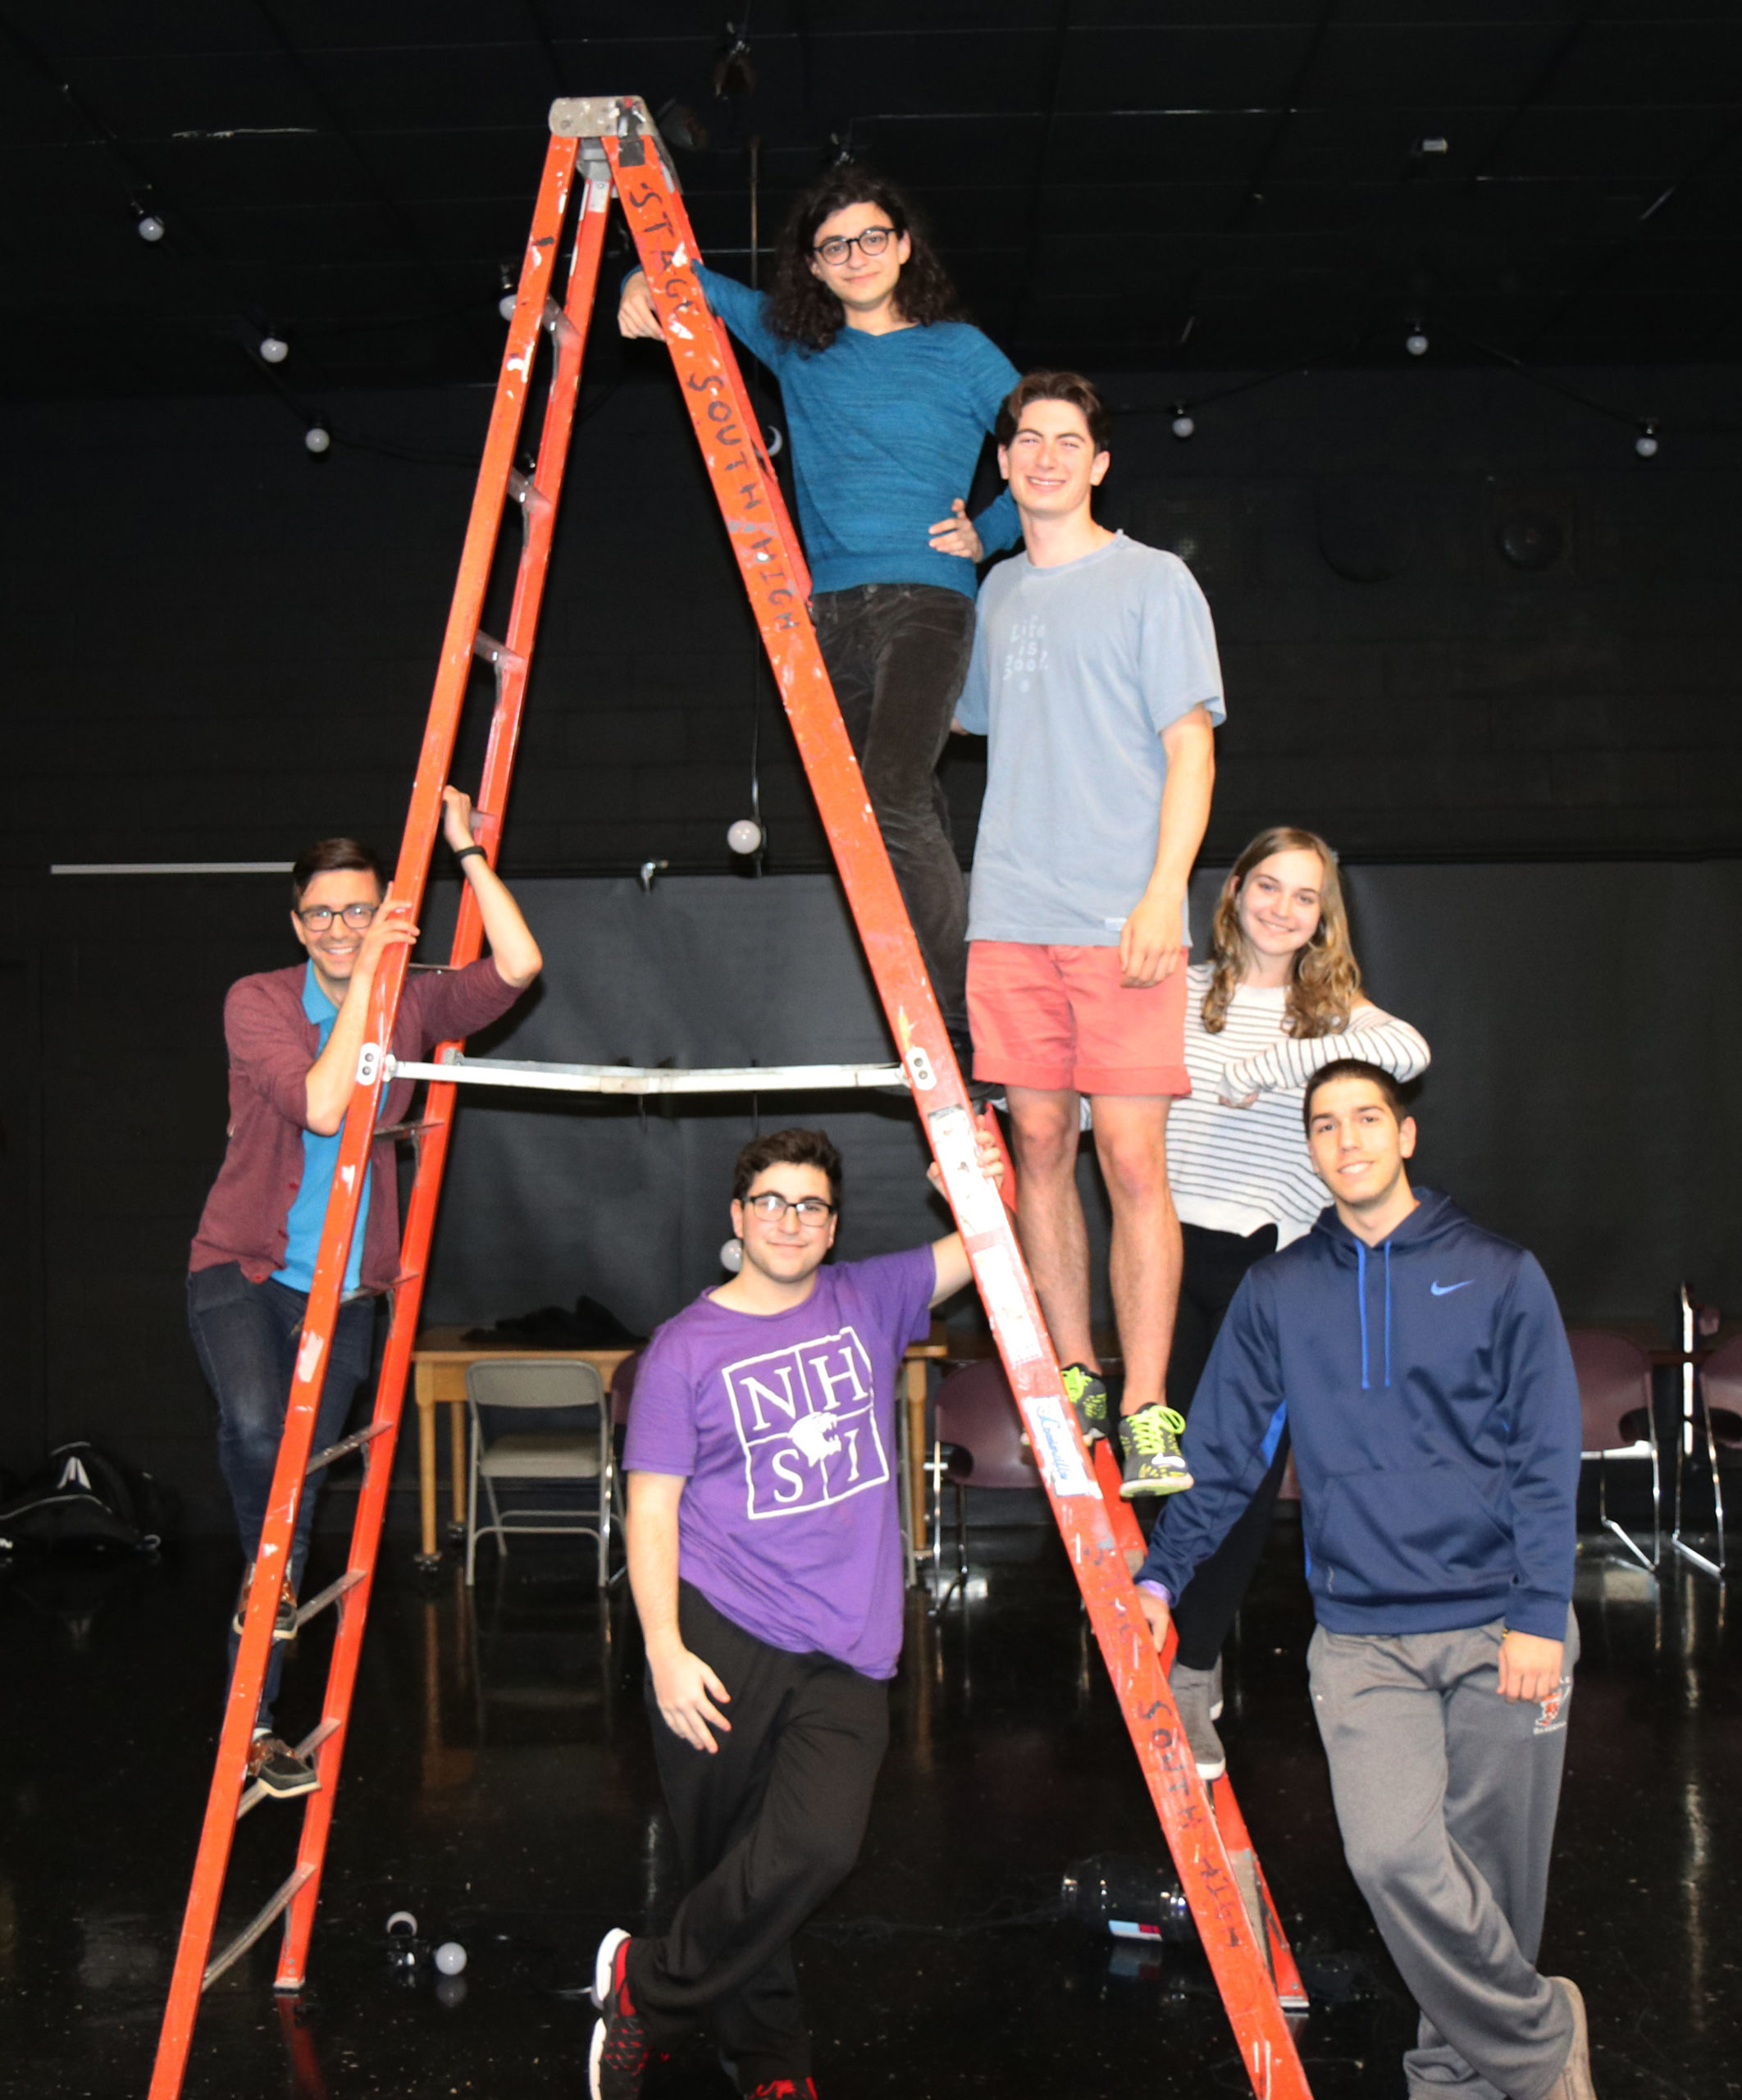 South High School will present its student-directed One-Act plays on May 3, 4, 10, and 11. (Photo courtesy of the Great Neck Public Schools)